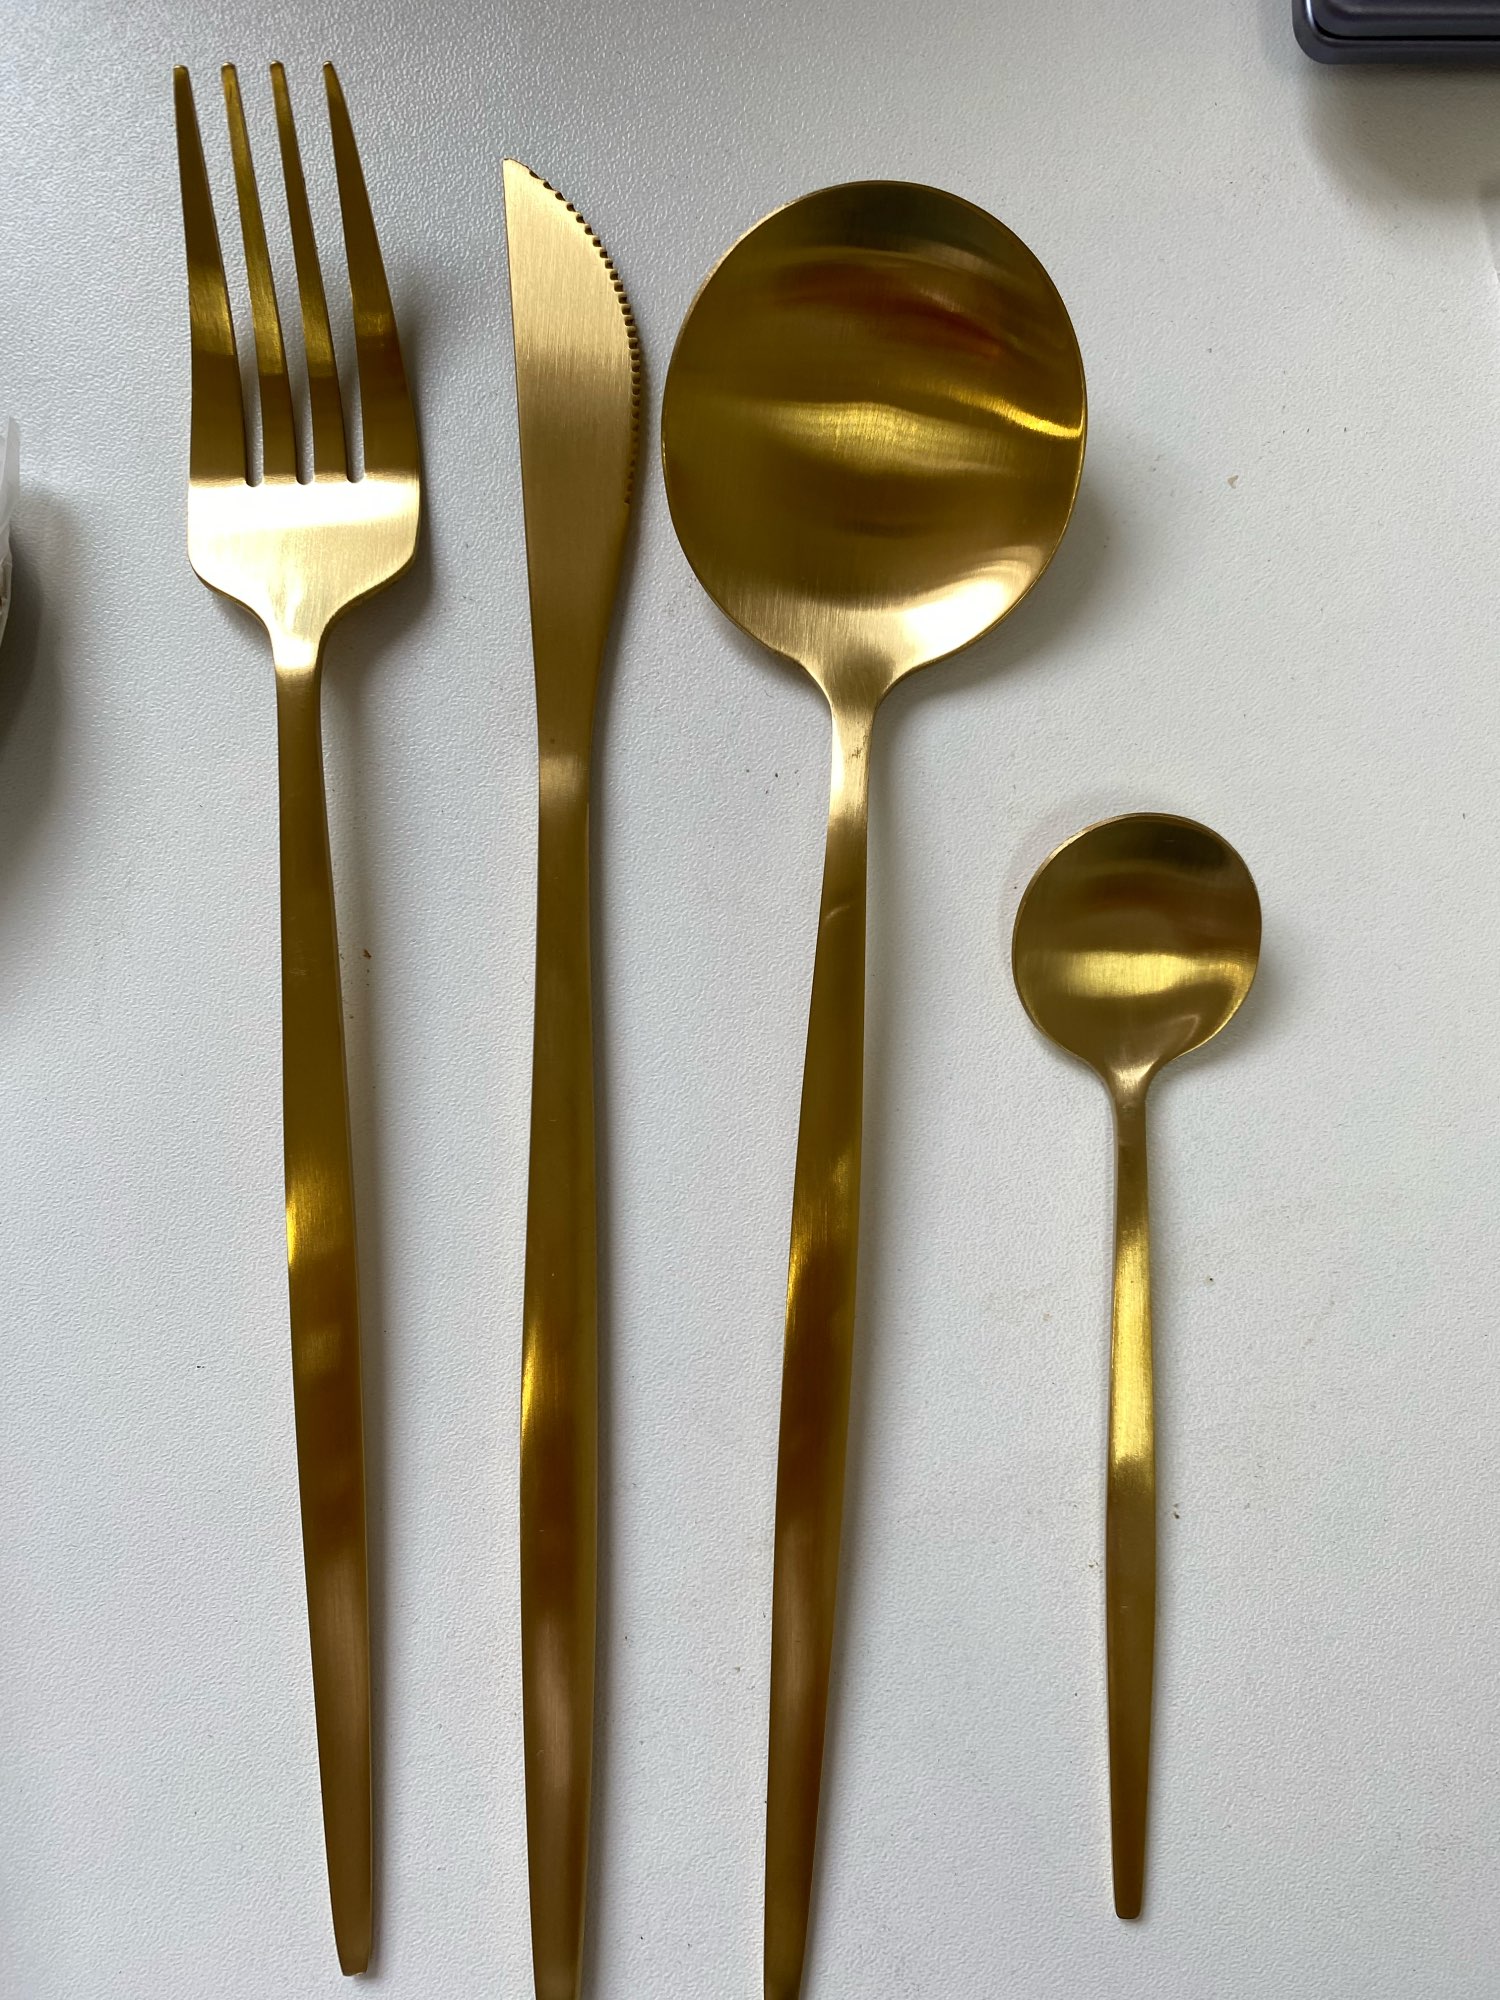 4Pcs Gold Black Dinnerware Set Stainless Steel Luxury Cutlery Set photo review